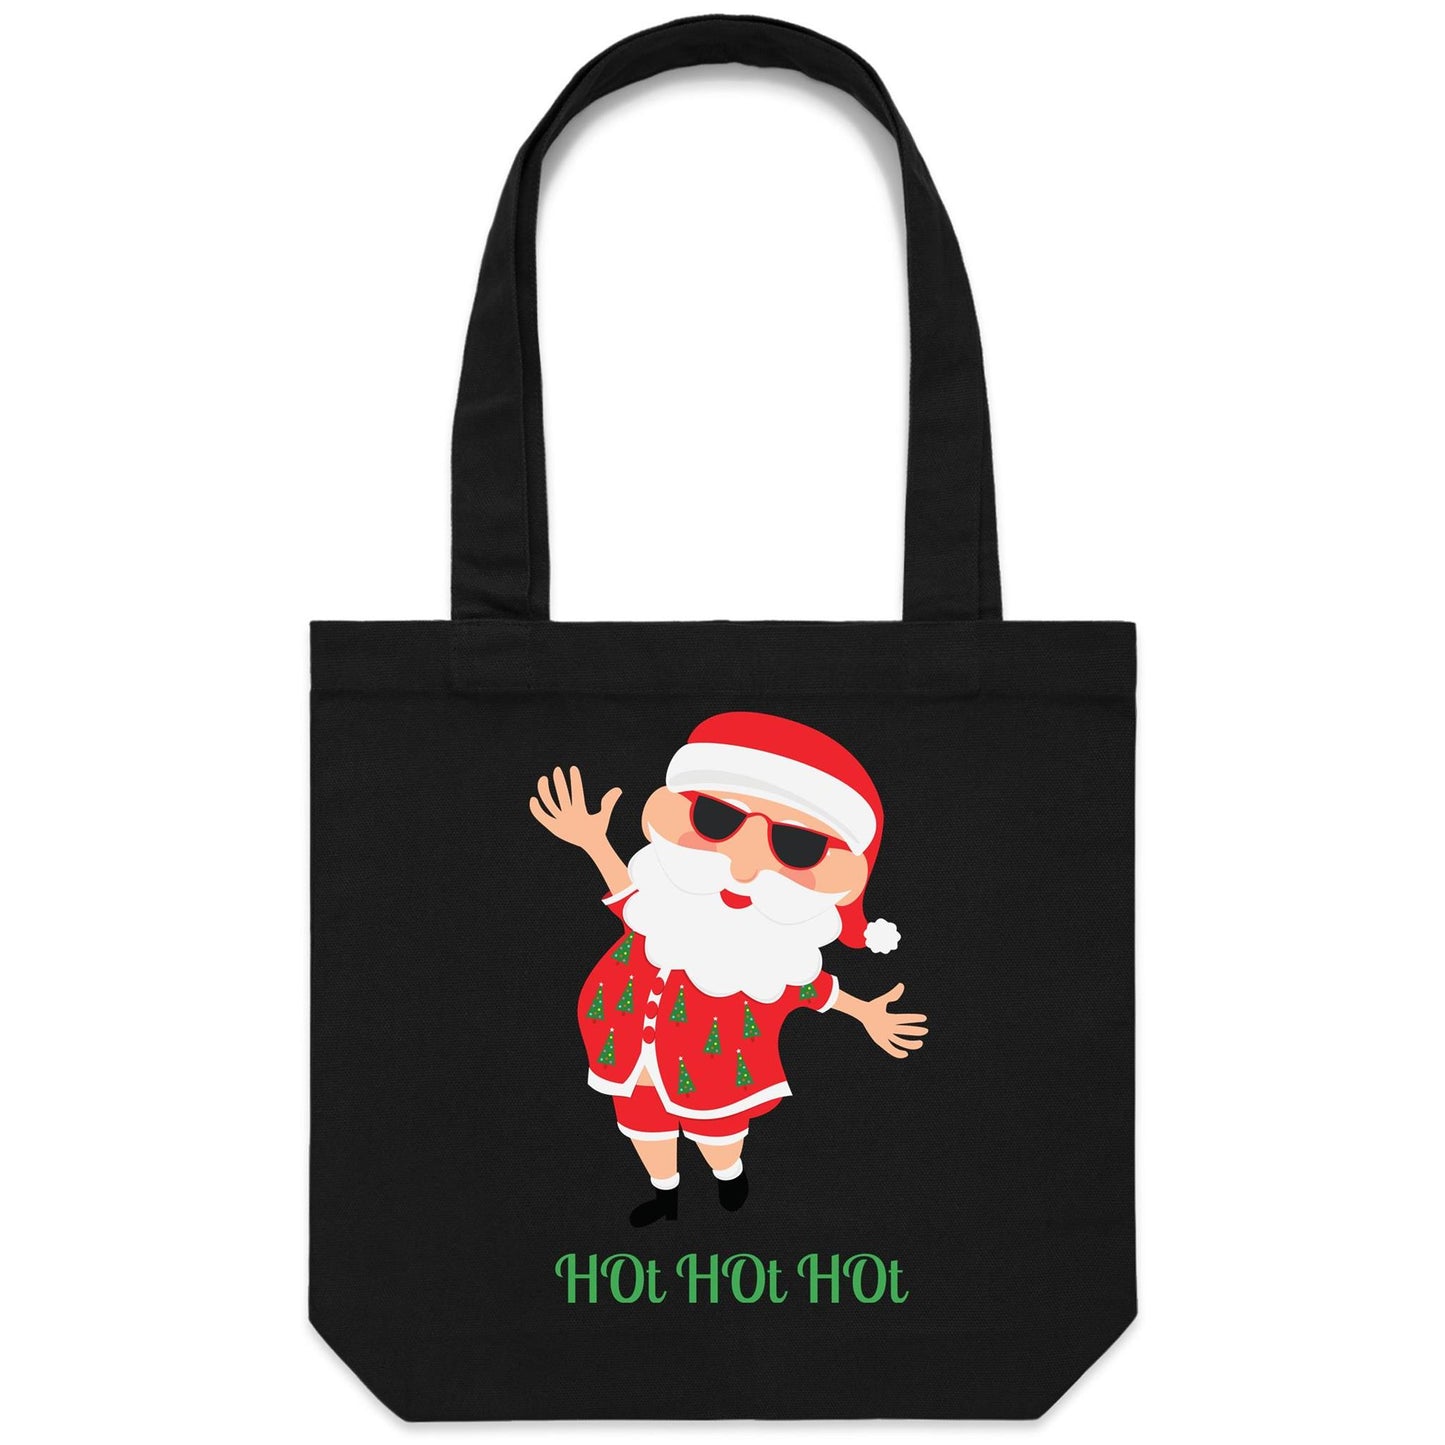 HOt HOt HOt - Canvas Tote Bag Black One Size Christmas Tote Bag Merry Christmas